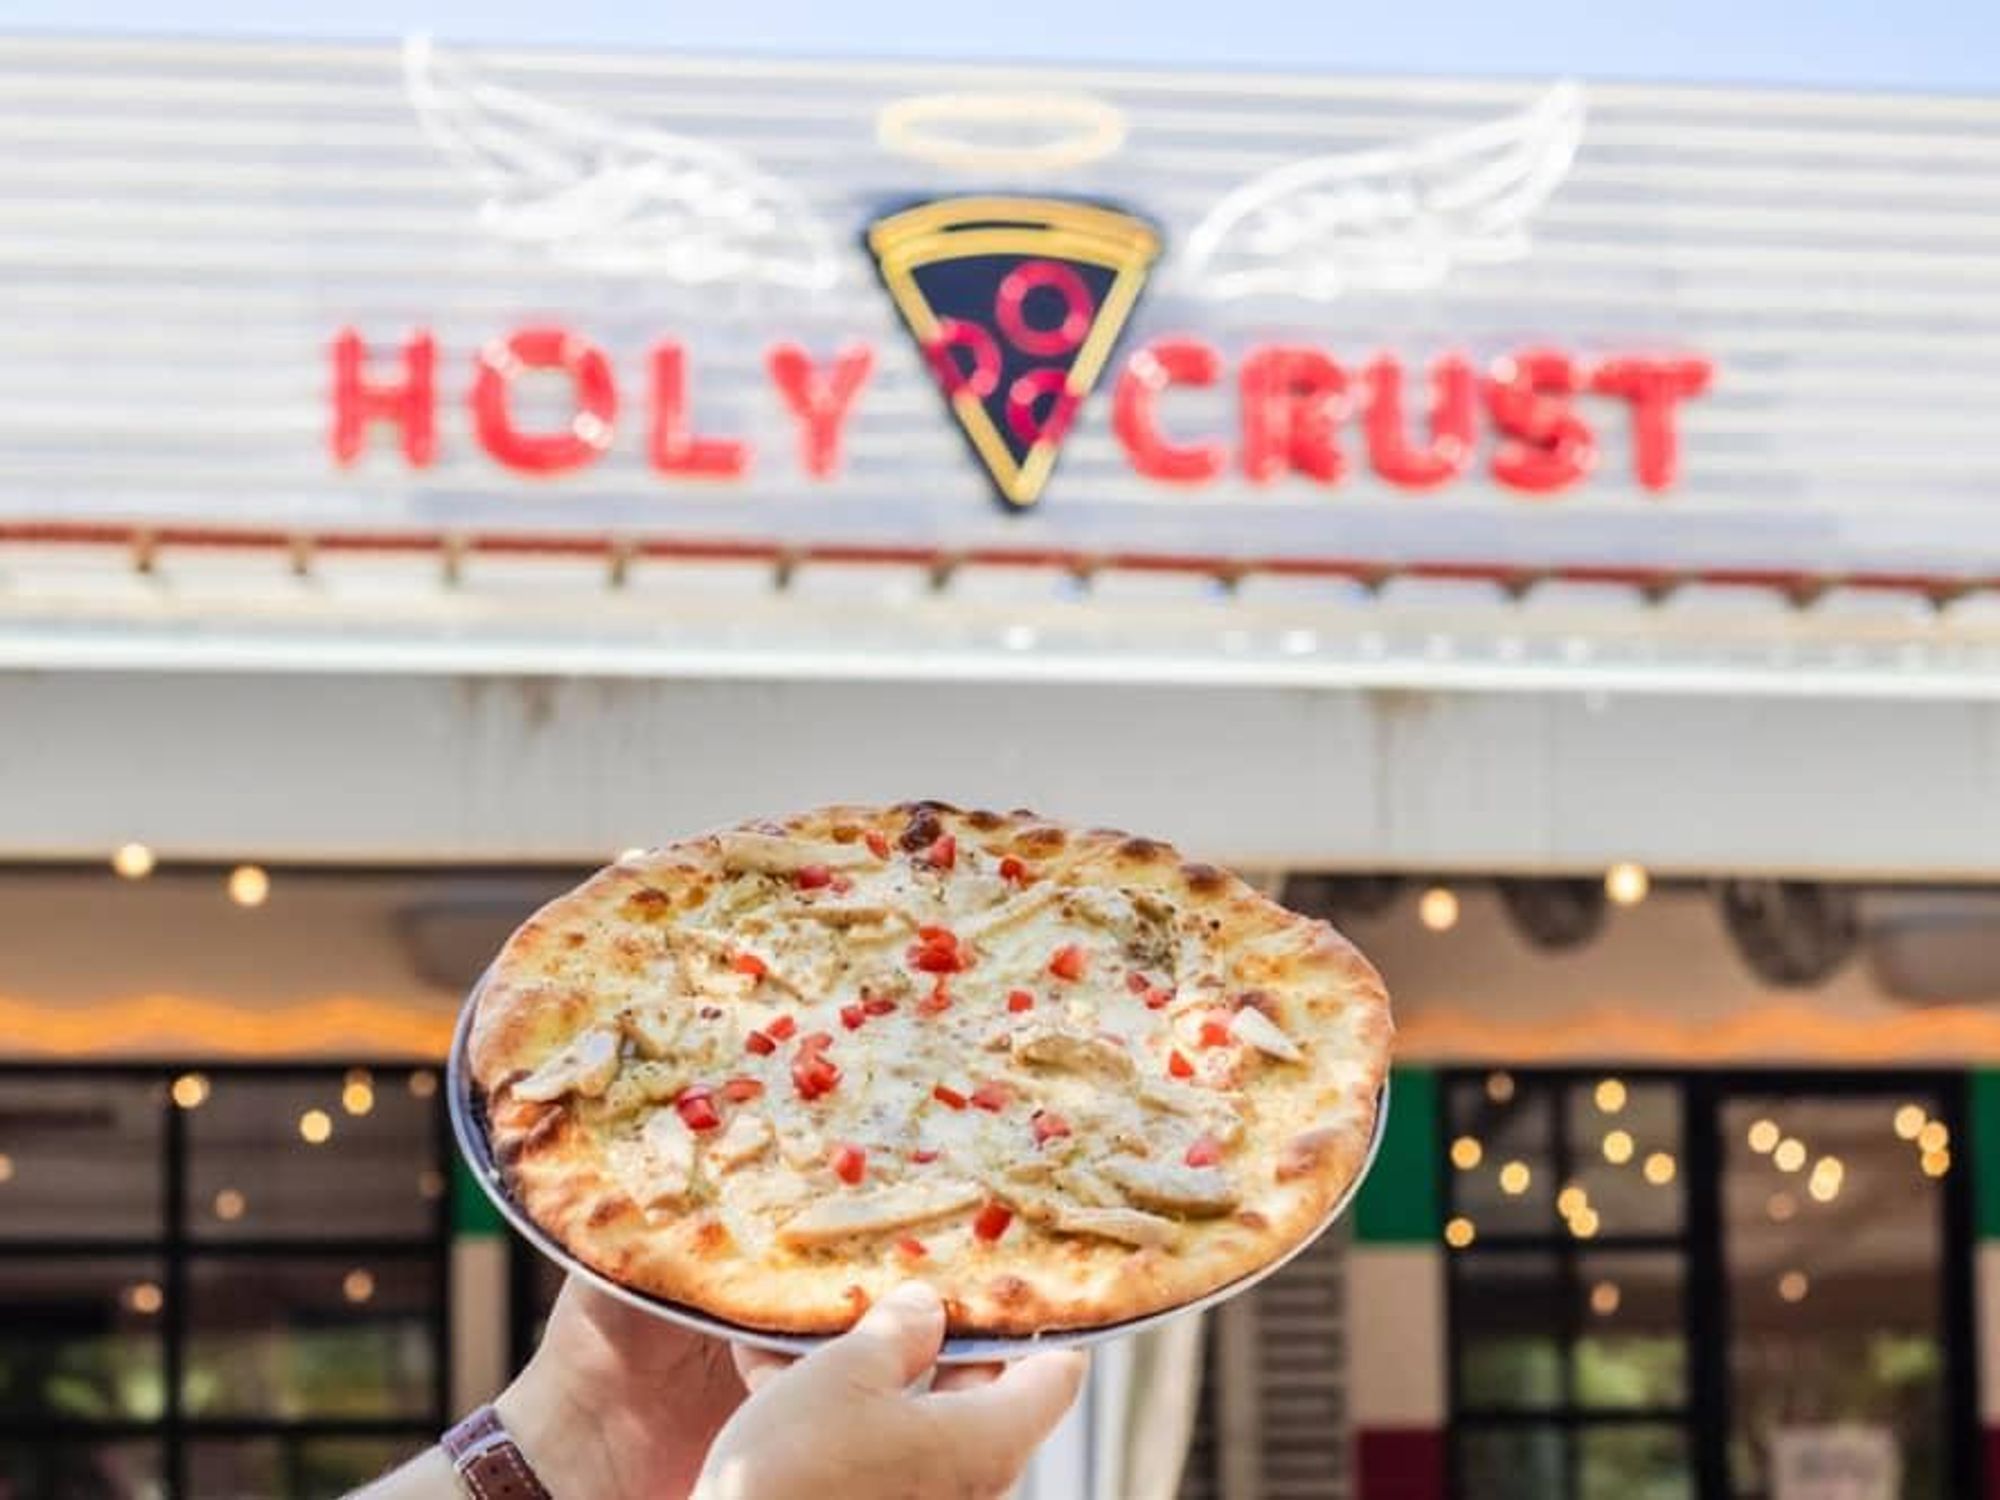 Holy crust pizza